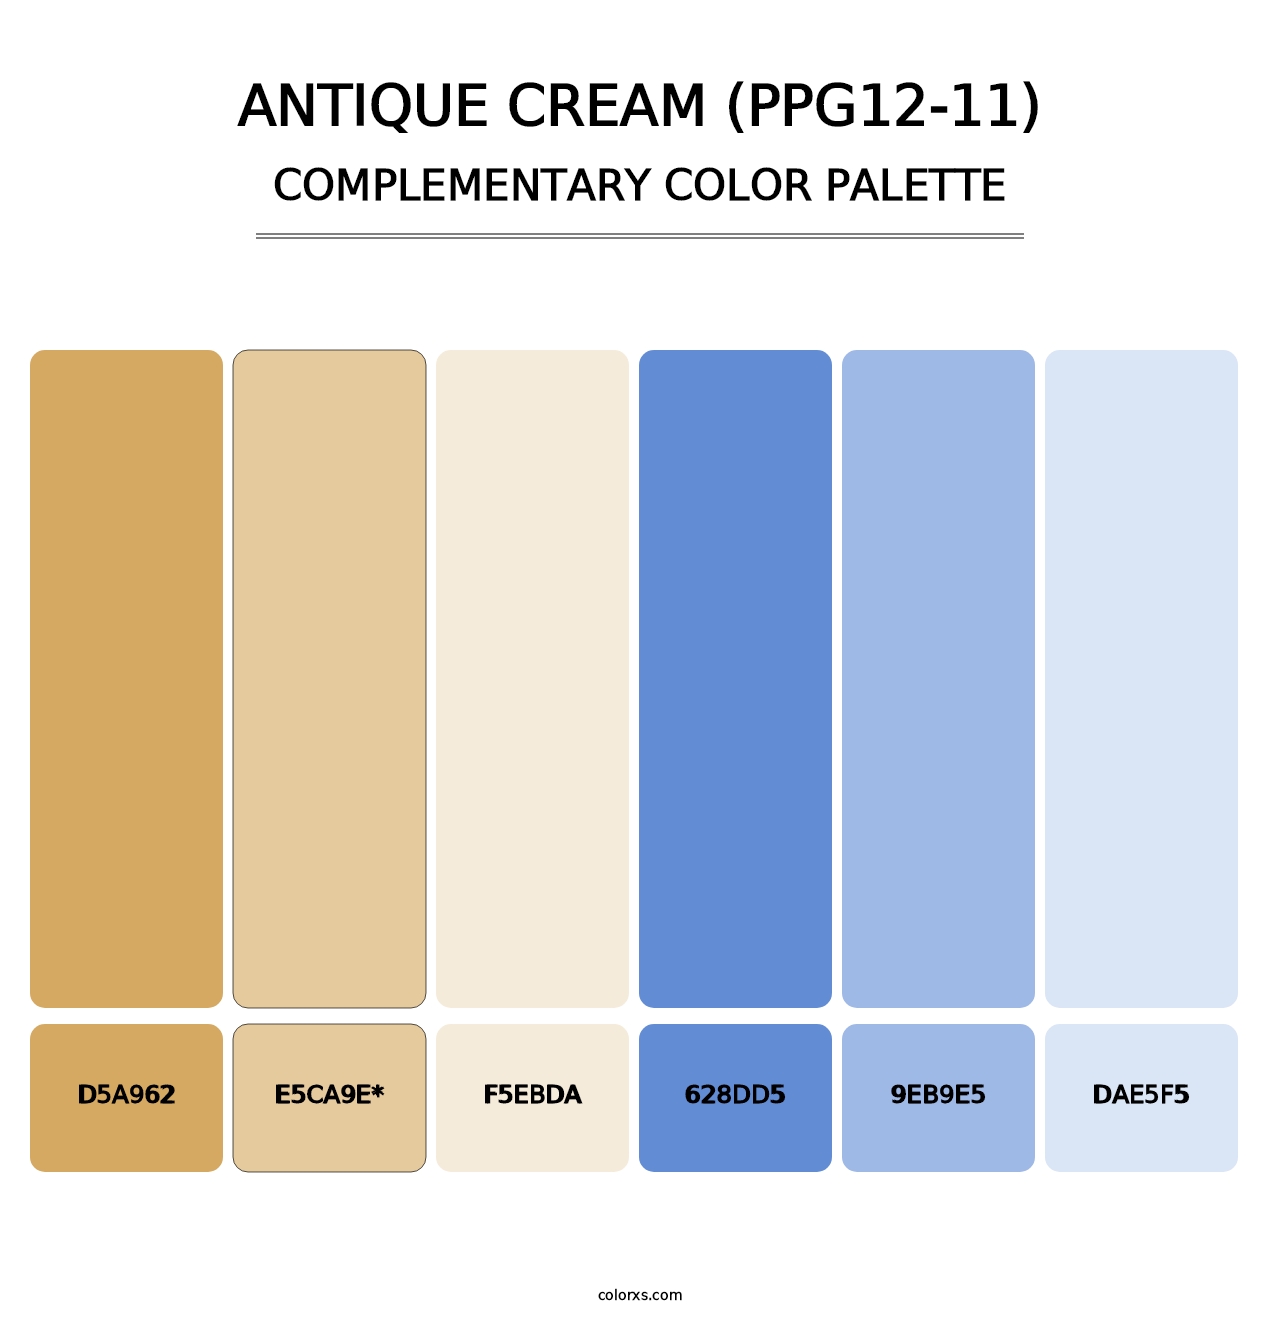 Antique Cream (PPG12-11) - Complementary Color Palette